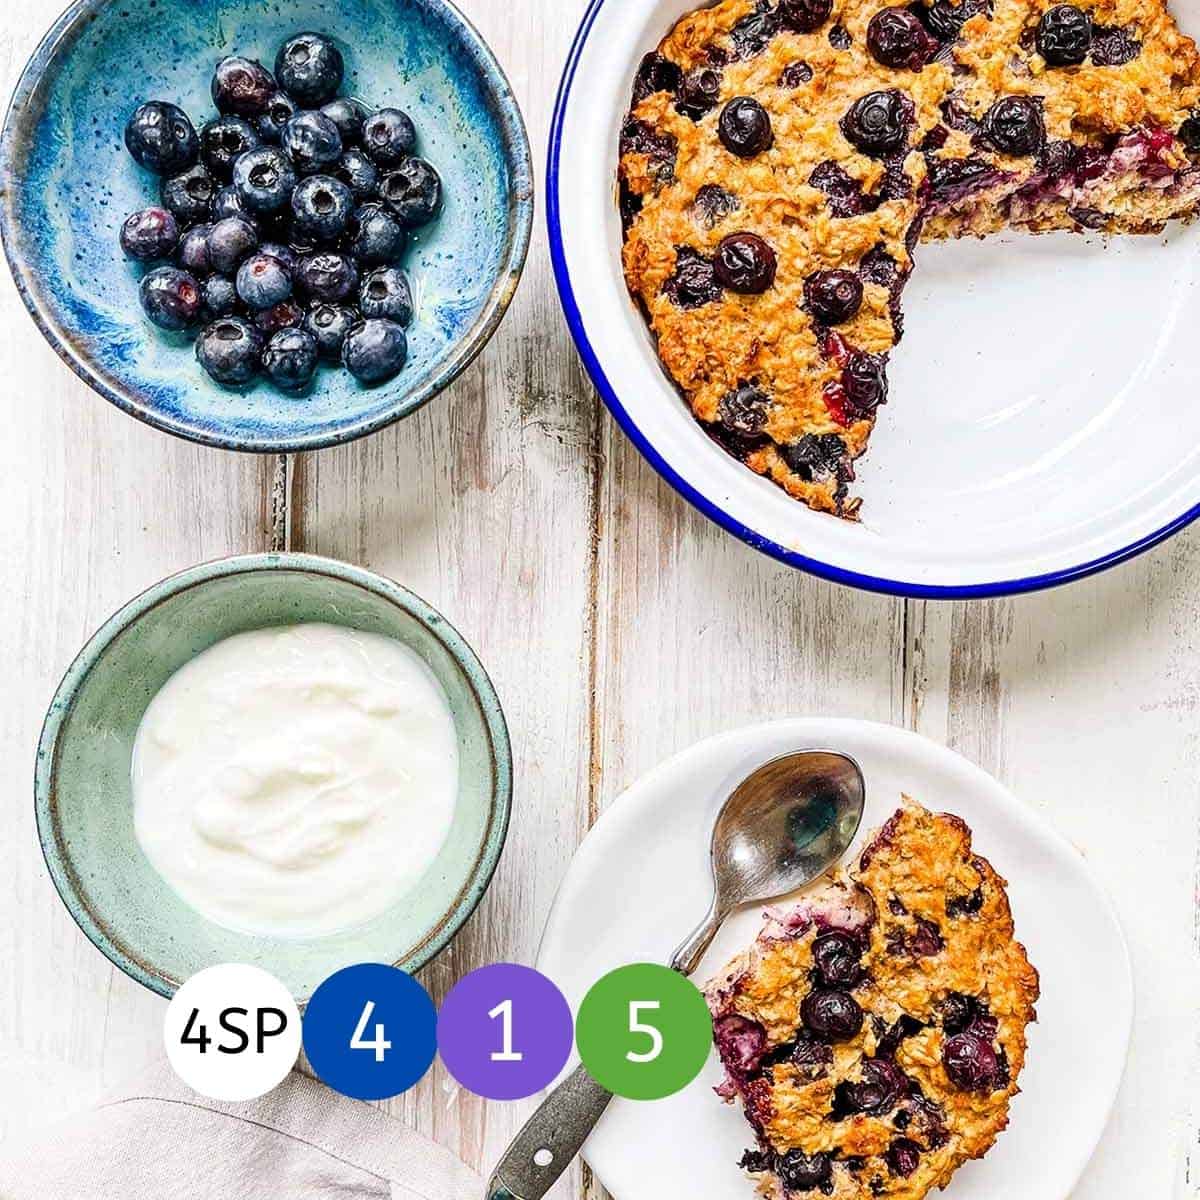 Baked Oatmeal with Blueberries | Weight Watchers